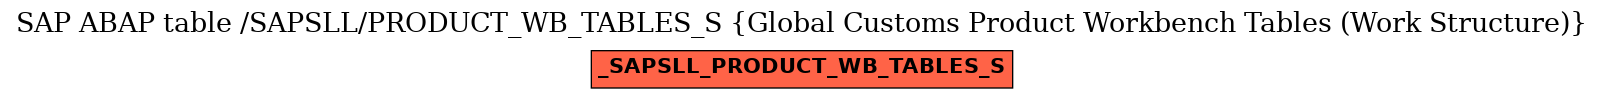 E-R Diagram for table /SAPSLL/PRODUCT_WB_TABLES_S (Global Customs Product Workbench Tables (Work Structure))